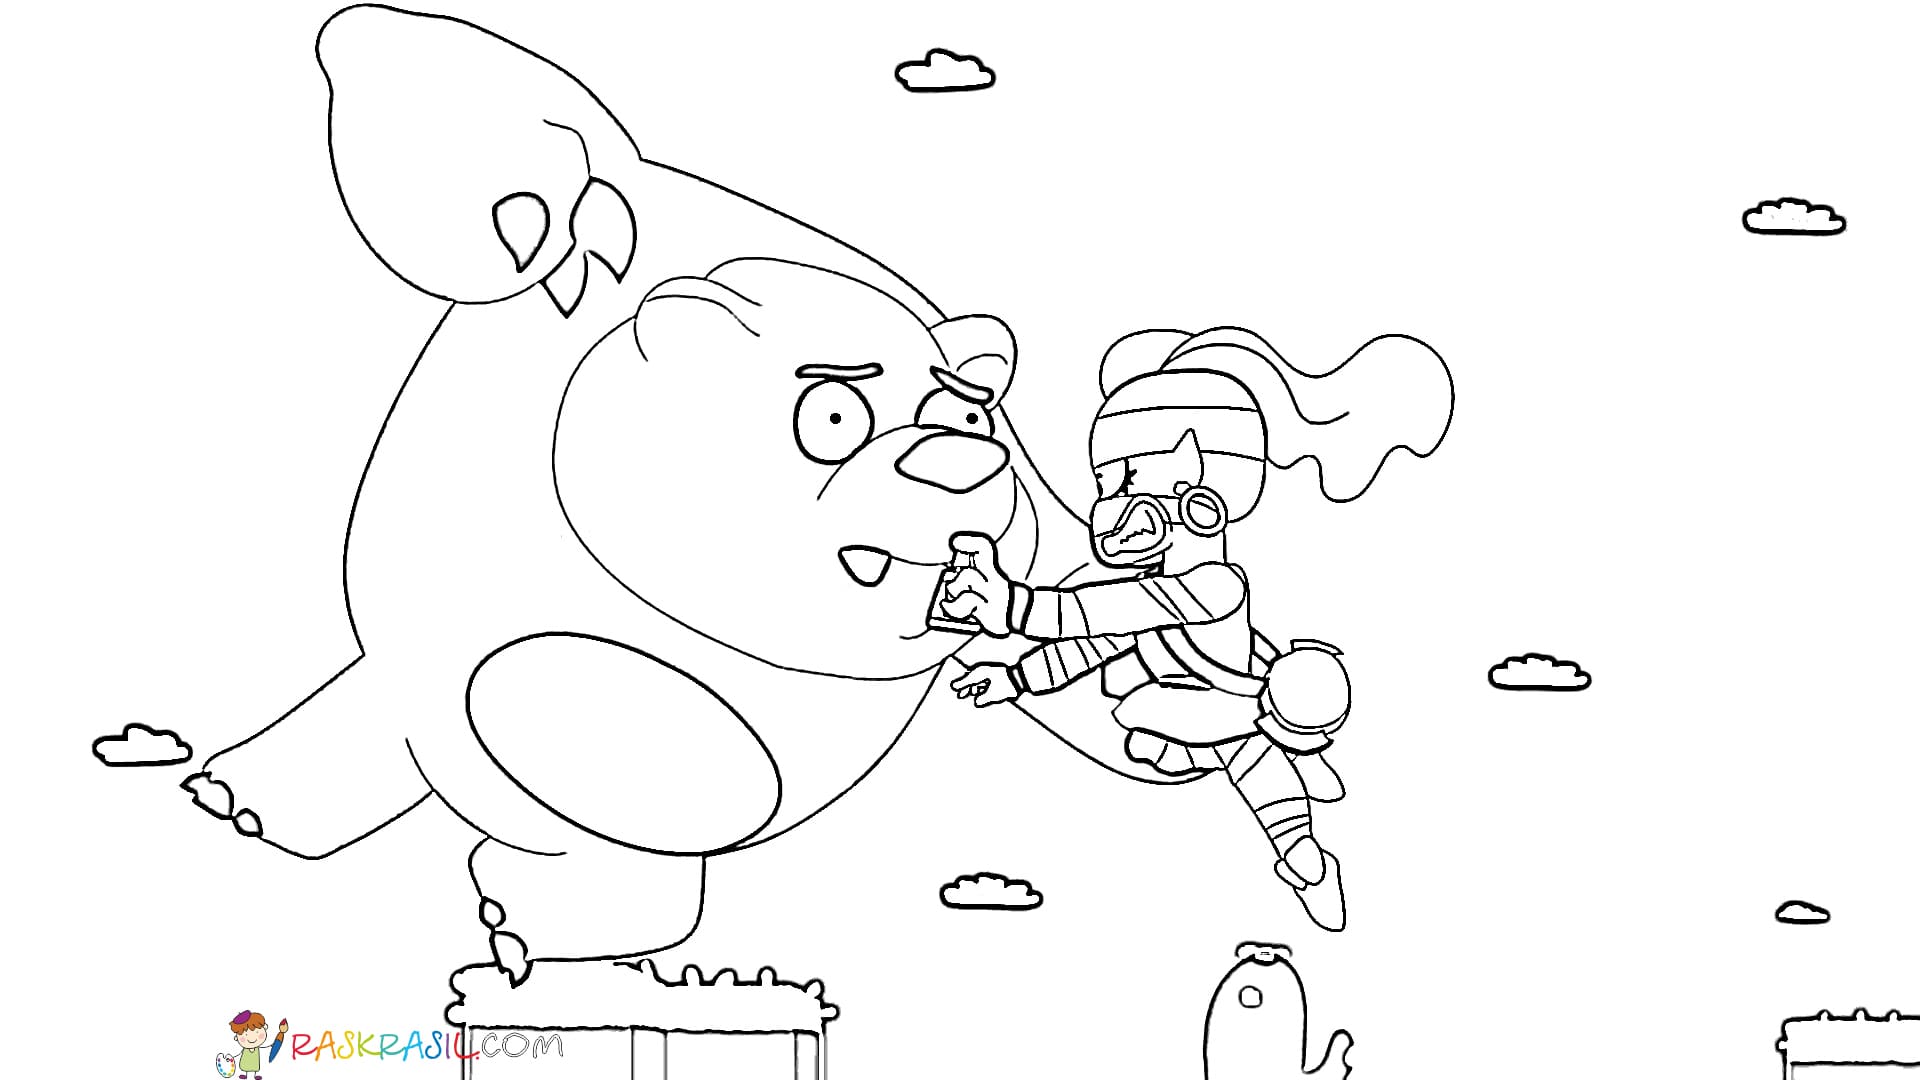 Coloring Pages Emz. Print out your Brawl Stars character online